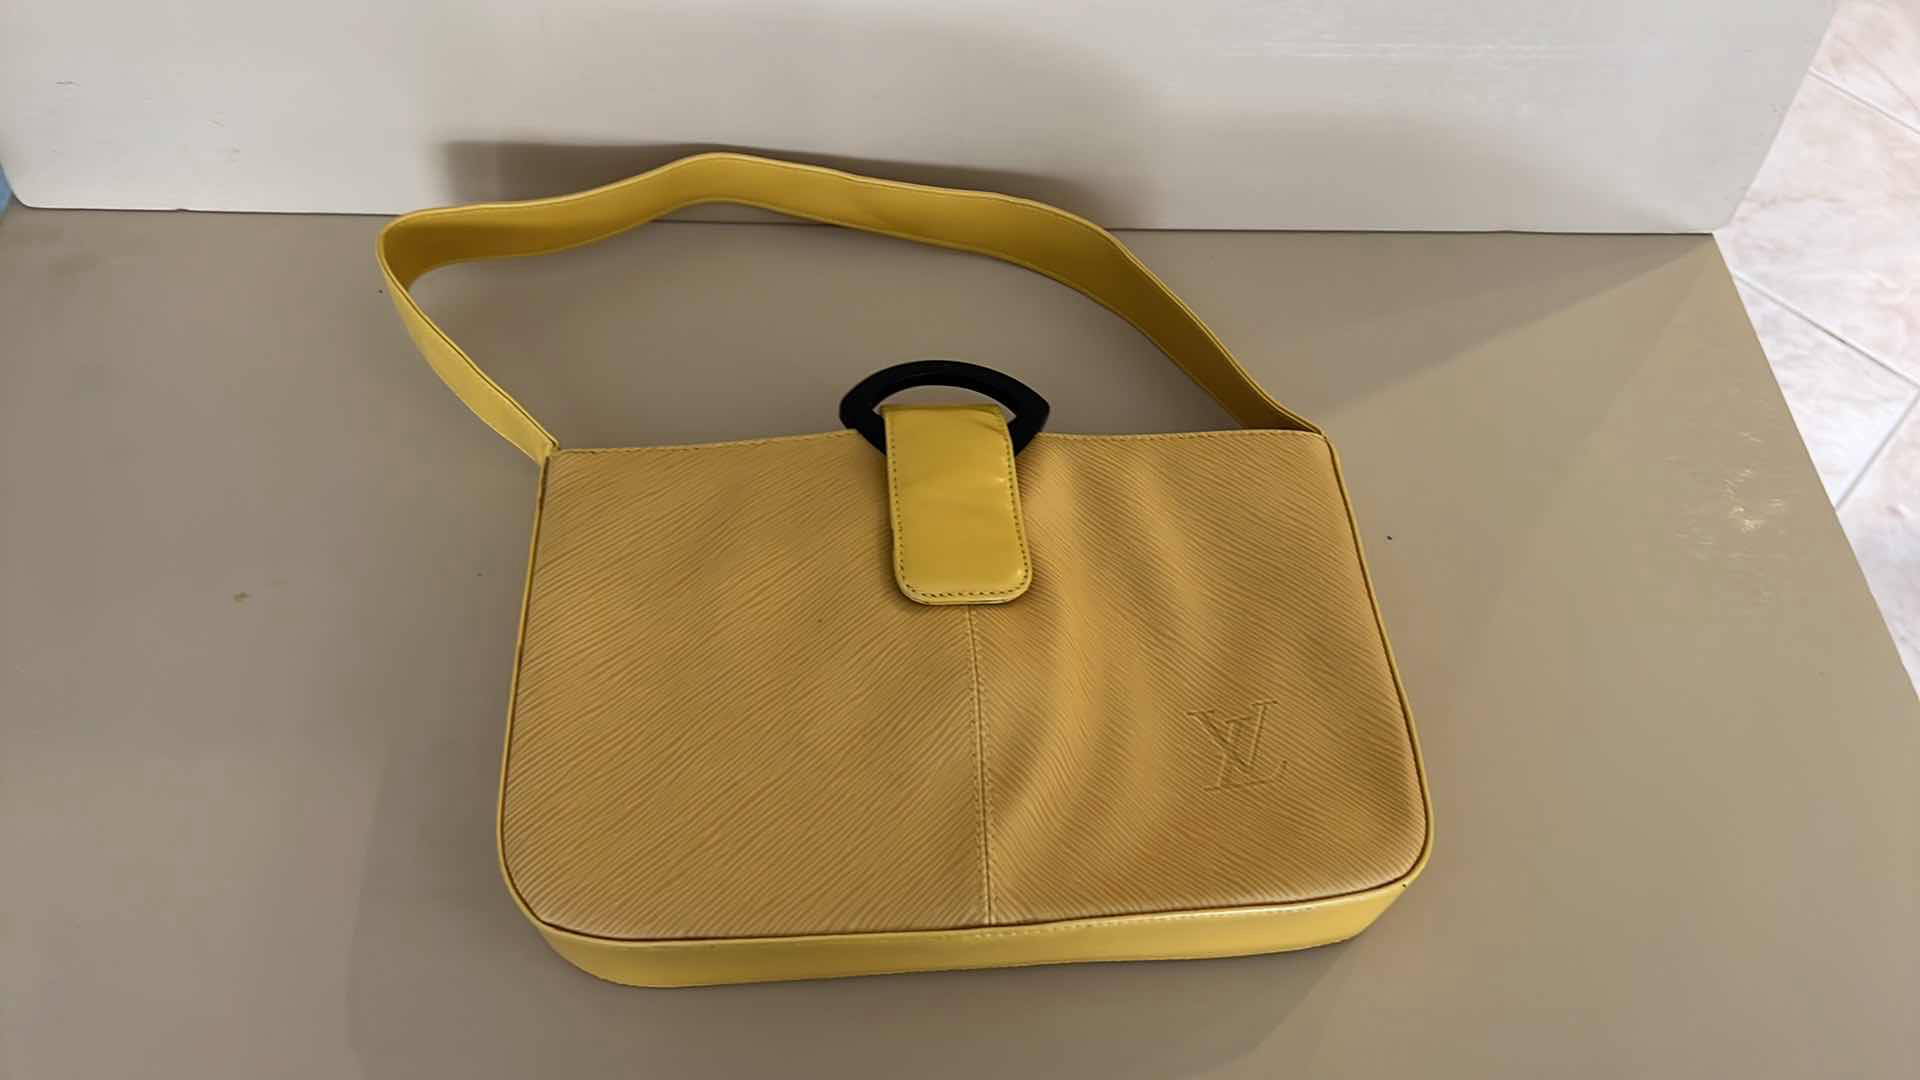 Photo 2 of CANARY YELLOW LOUIS VUITTON HANDBAG (NOT AUTHENTIC)